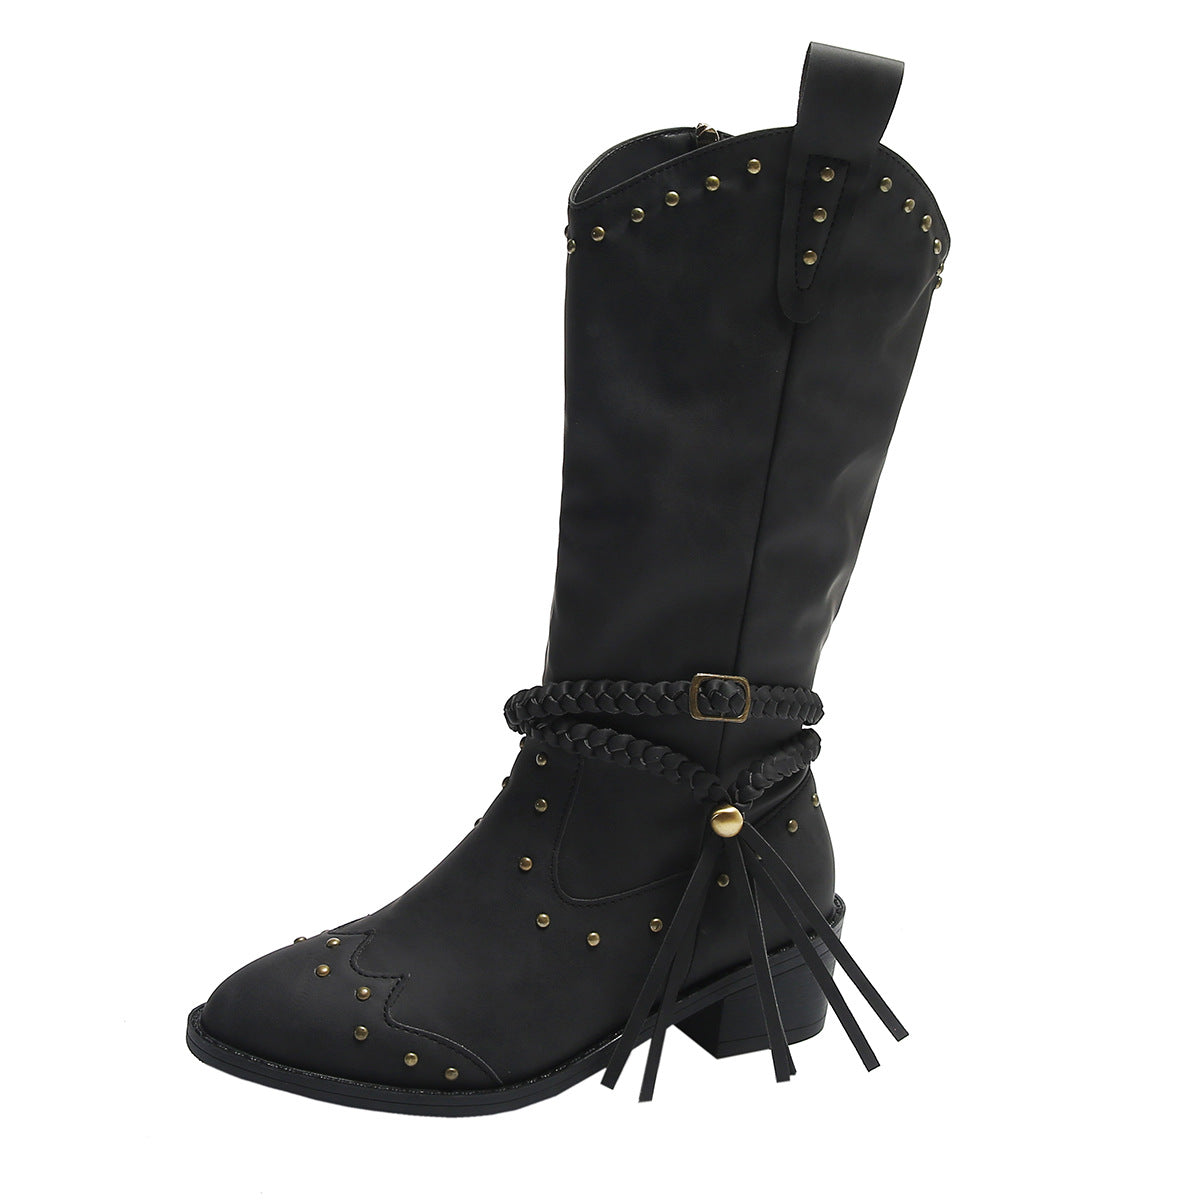 Retro Tassel Boots With Braided Rope Strap Buckle Design Shoes Winter Footwear New Mid-calf Knight Western Boots For Women